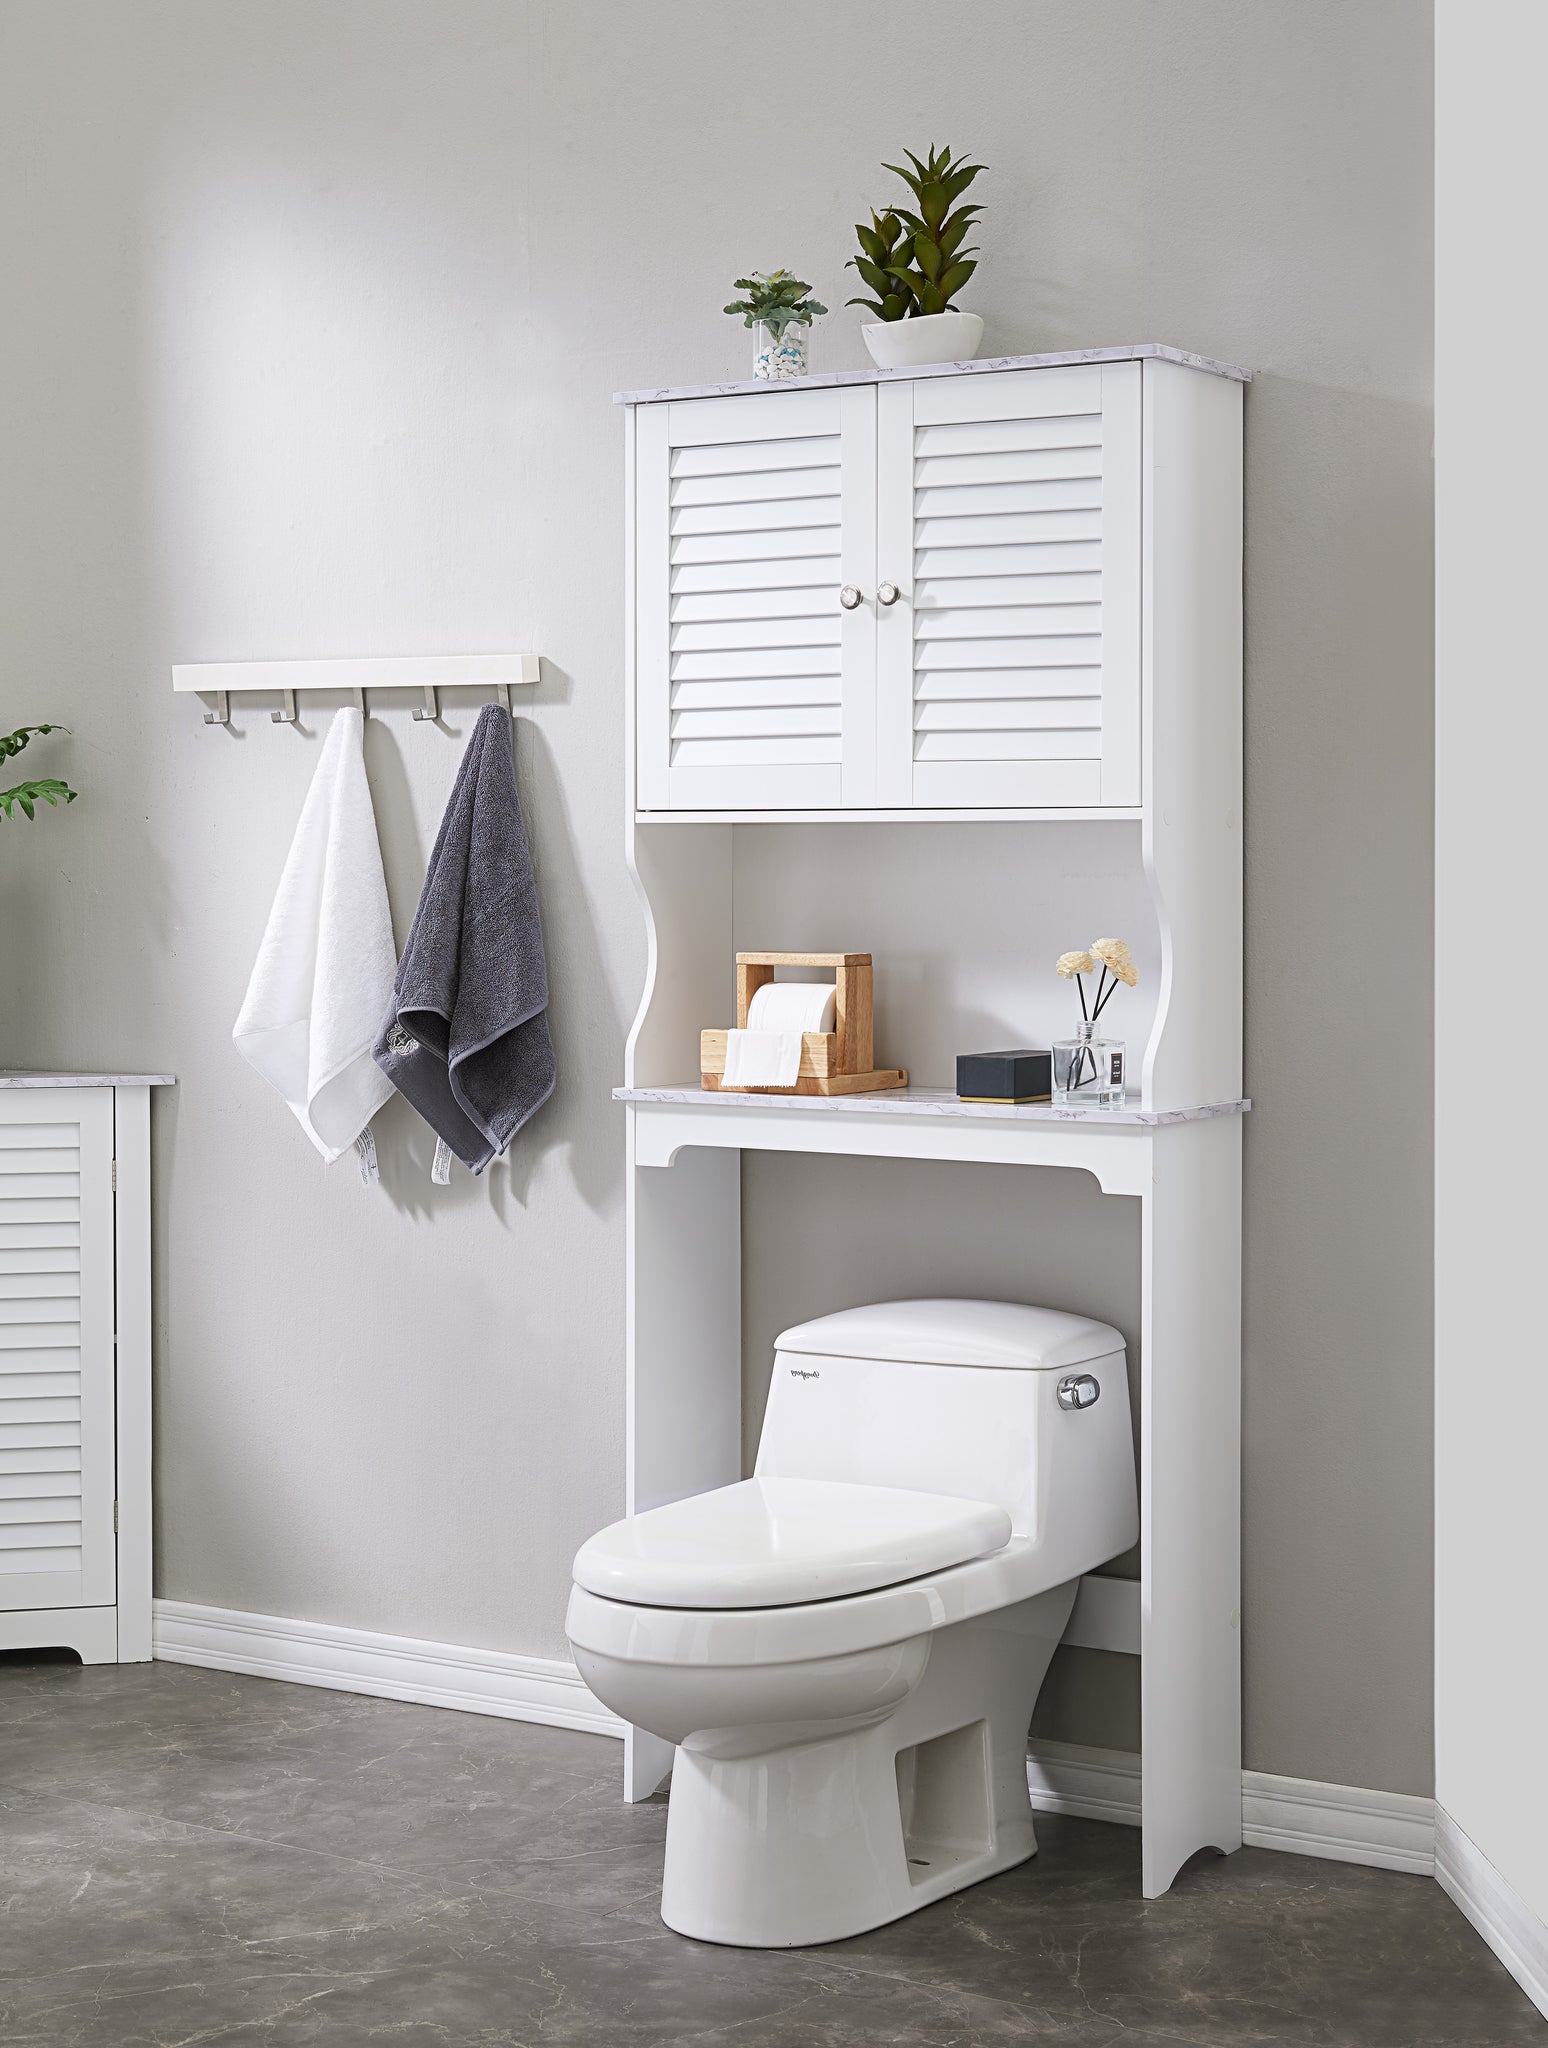 Wooden Over the Toilet Storage Cabinet Bathroom Space Saver with